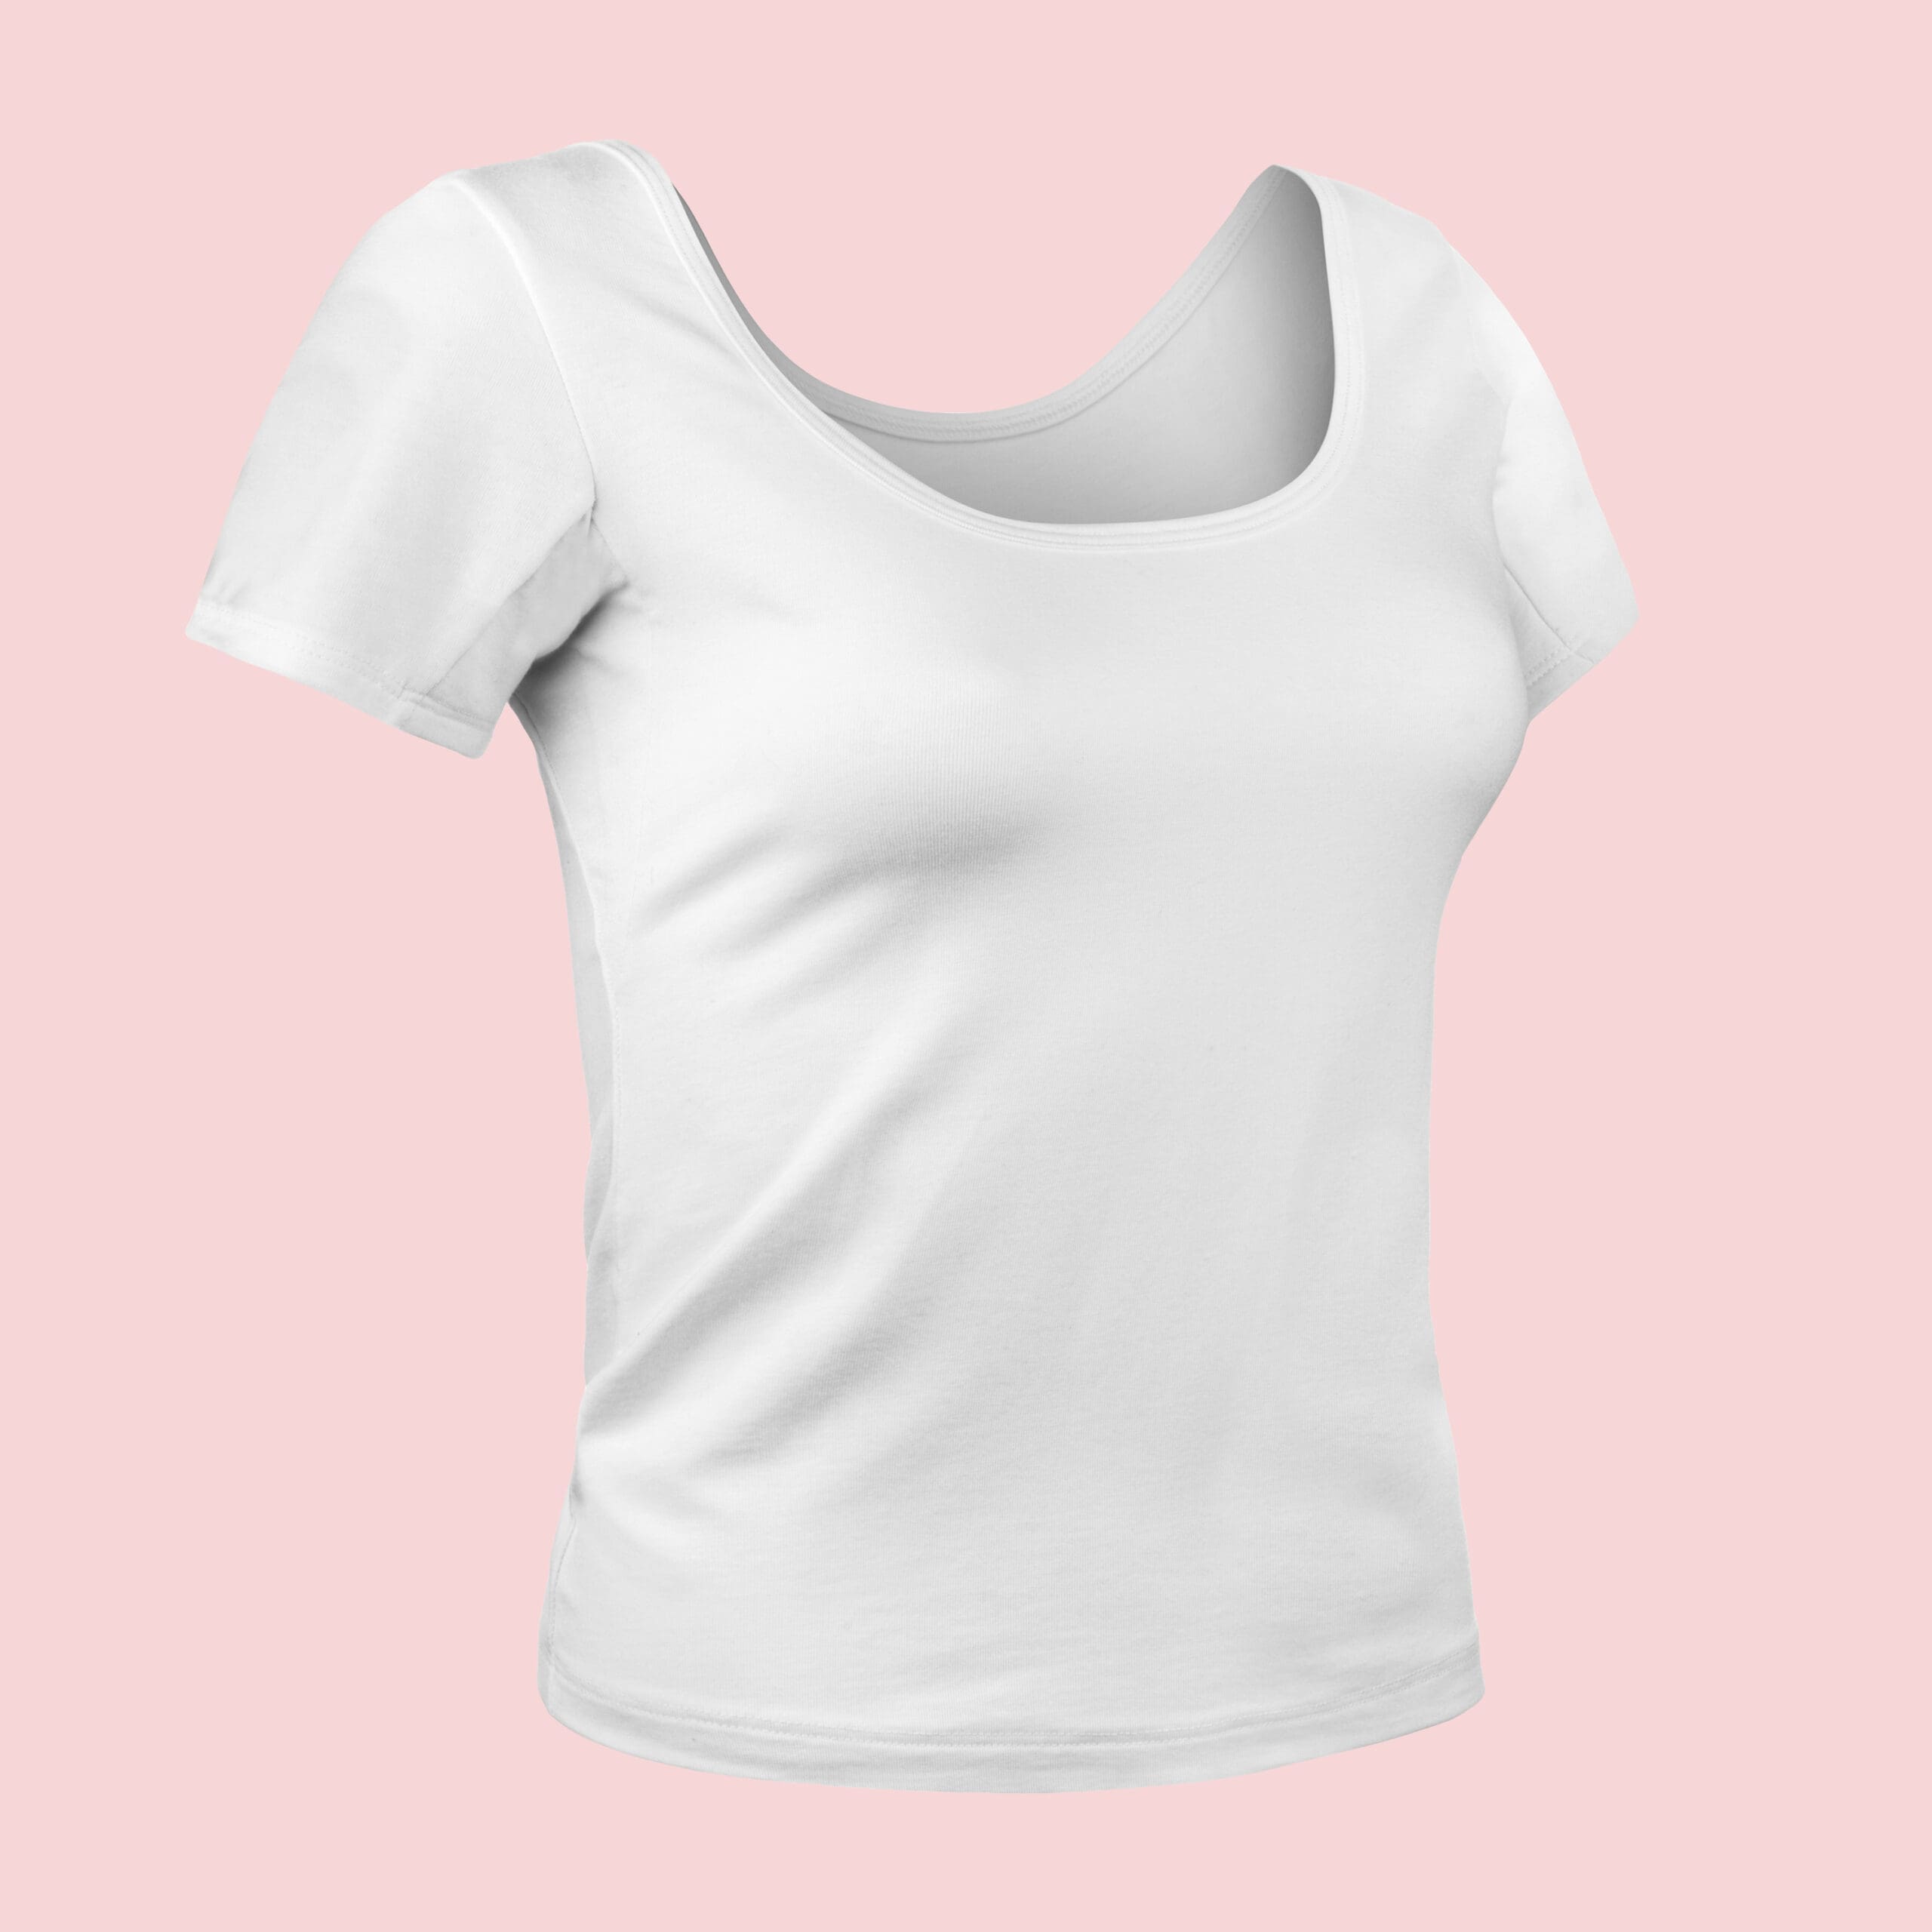 A ghost mannequin photo depicting a women's shirt on a pink background